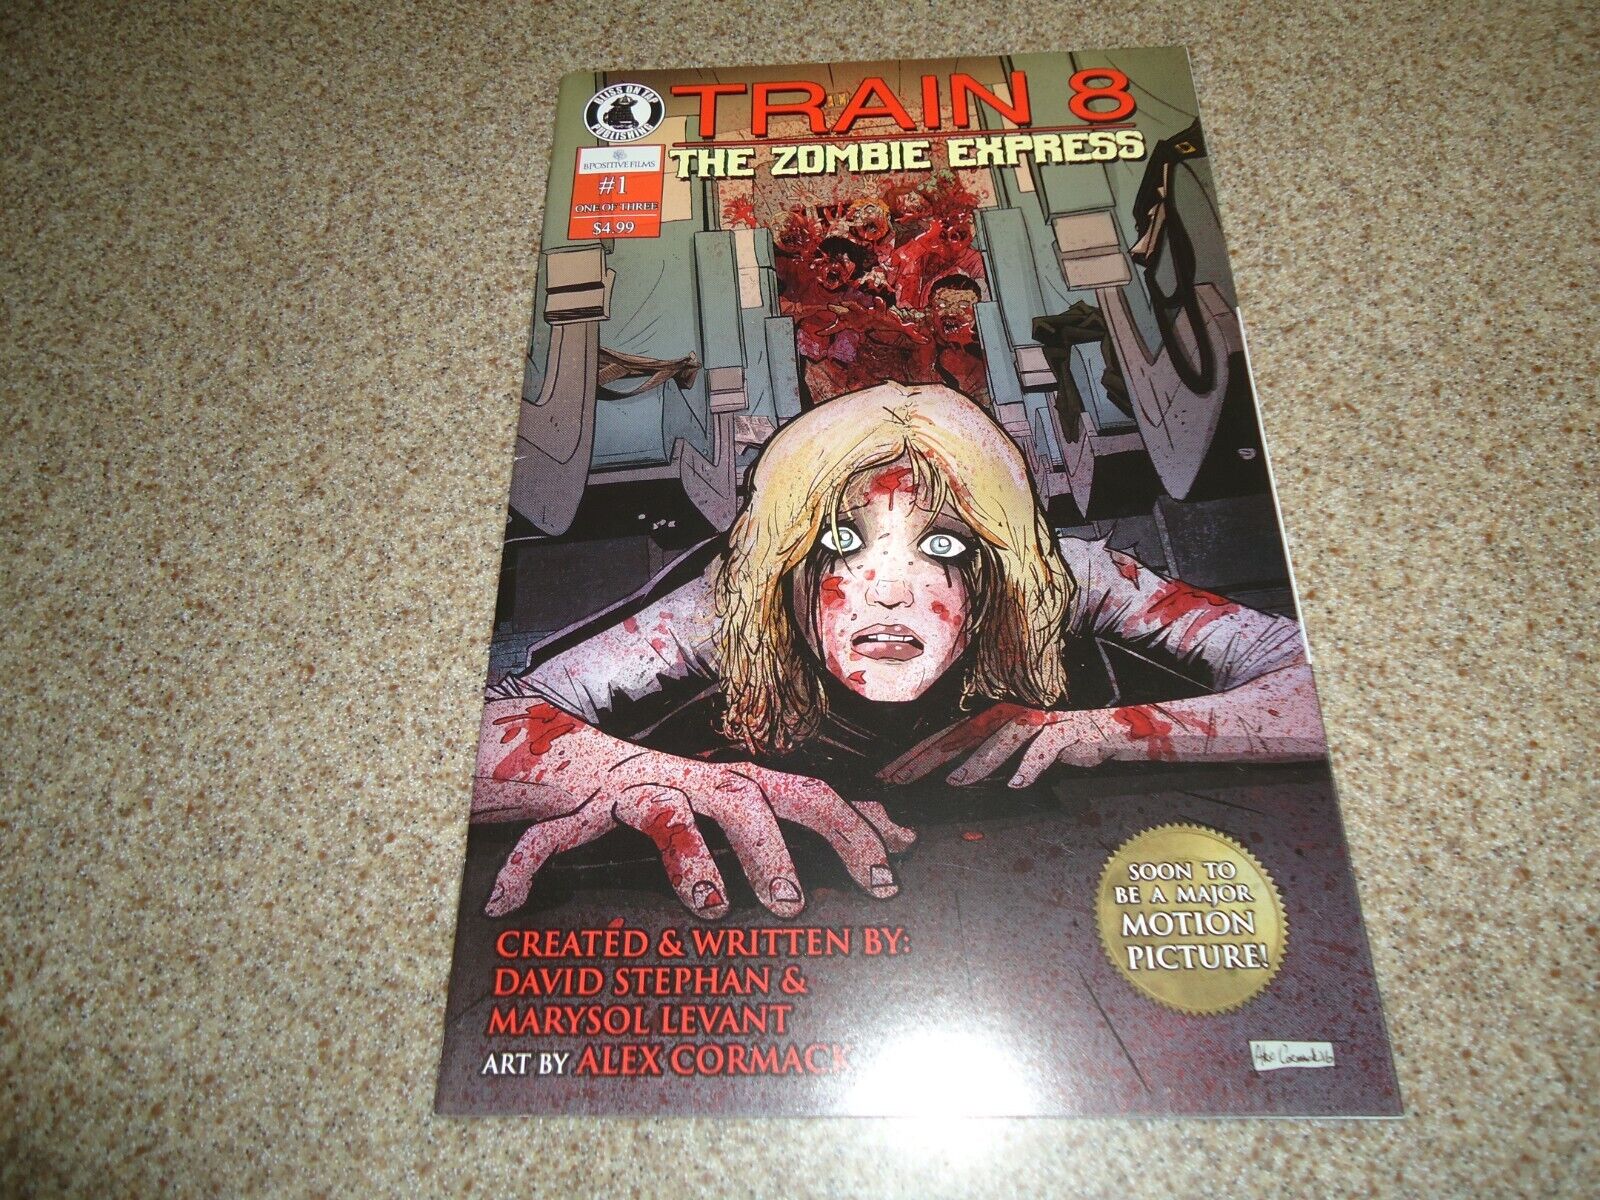 TRAIN 8 THE ZOMBIE EXPRESS #1